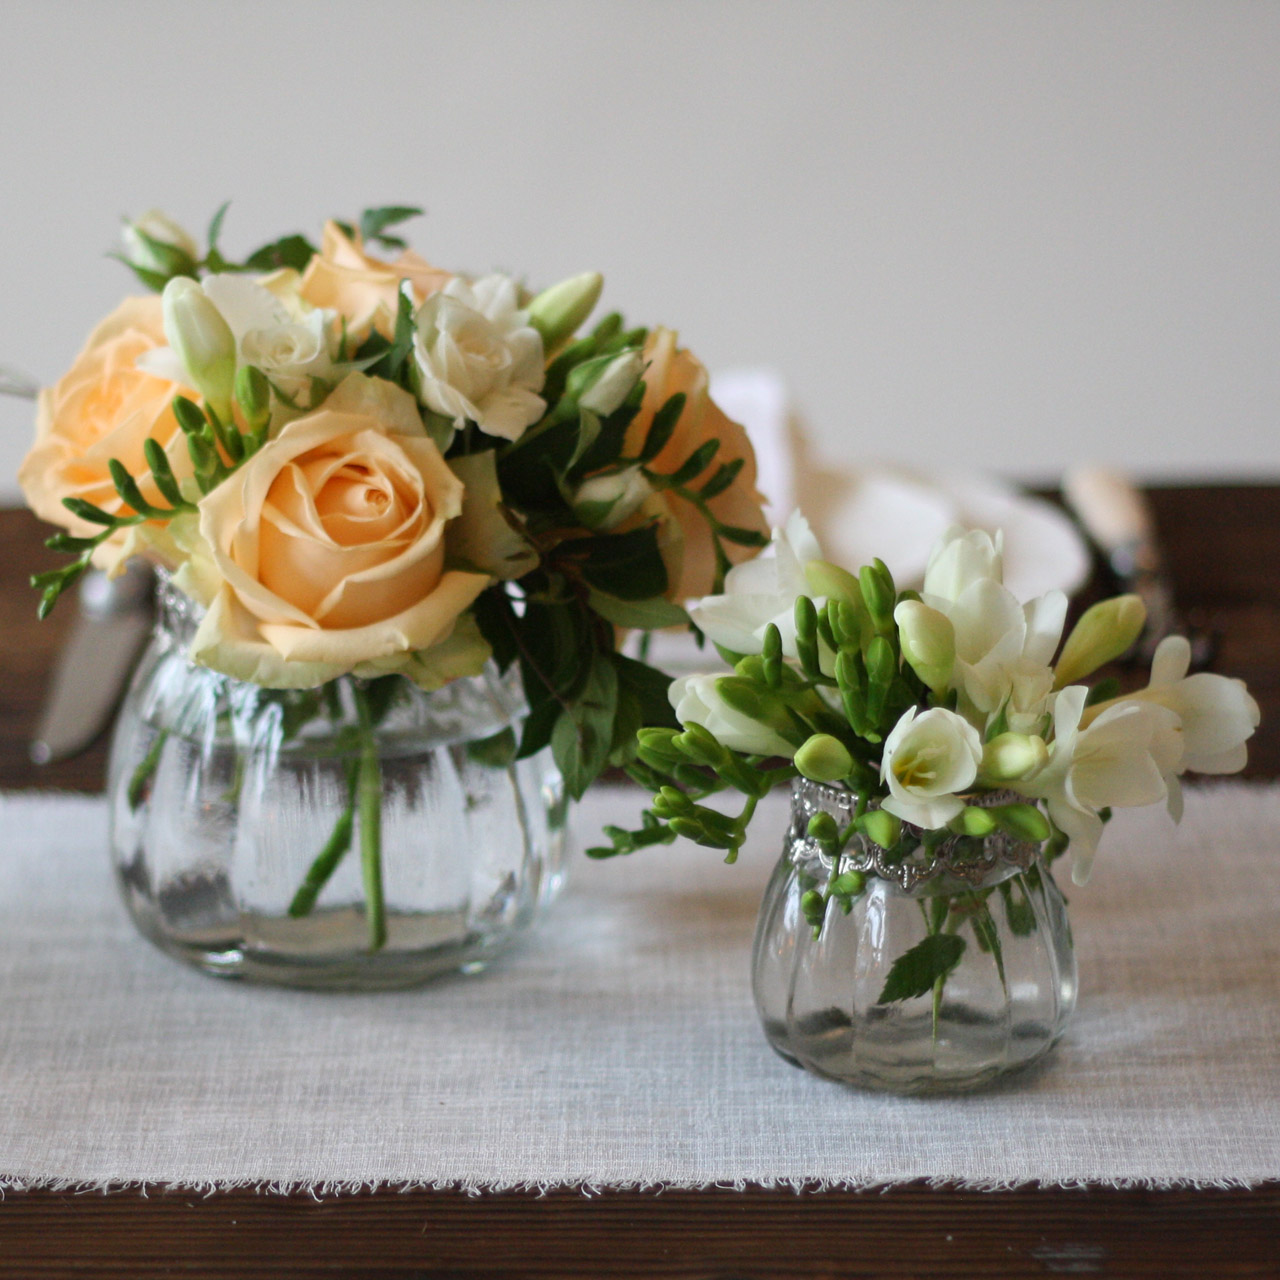  Elegant glass and silver bud vase or larger vase - perfect for wedding decorations - available from @theweddingomd